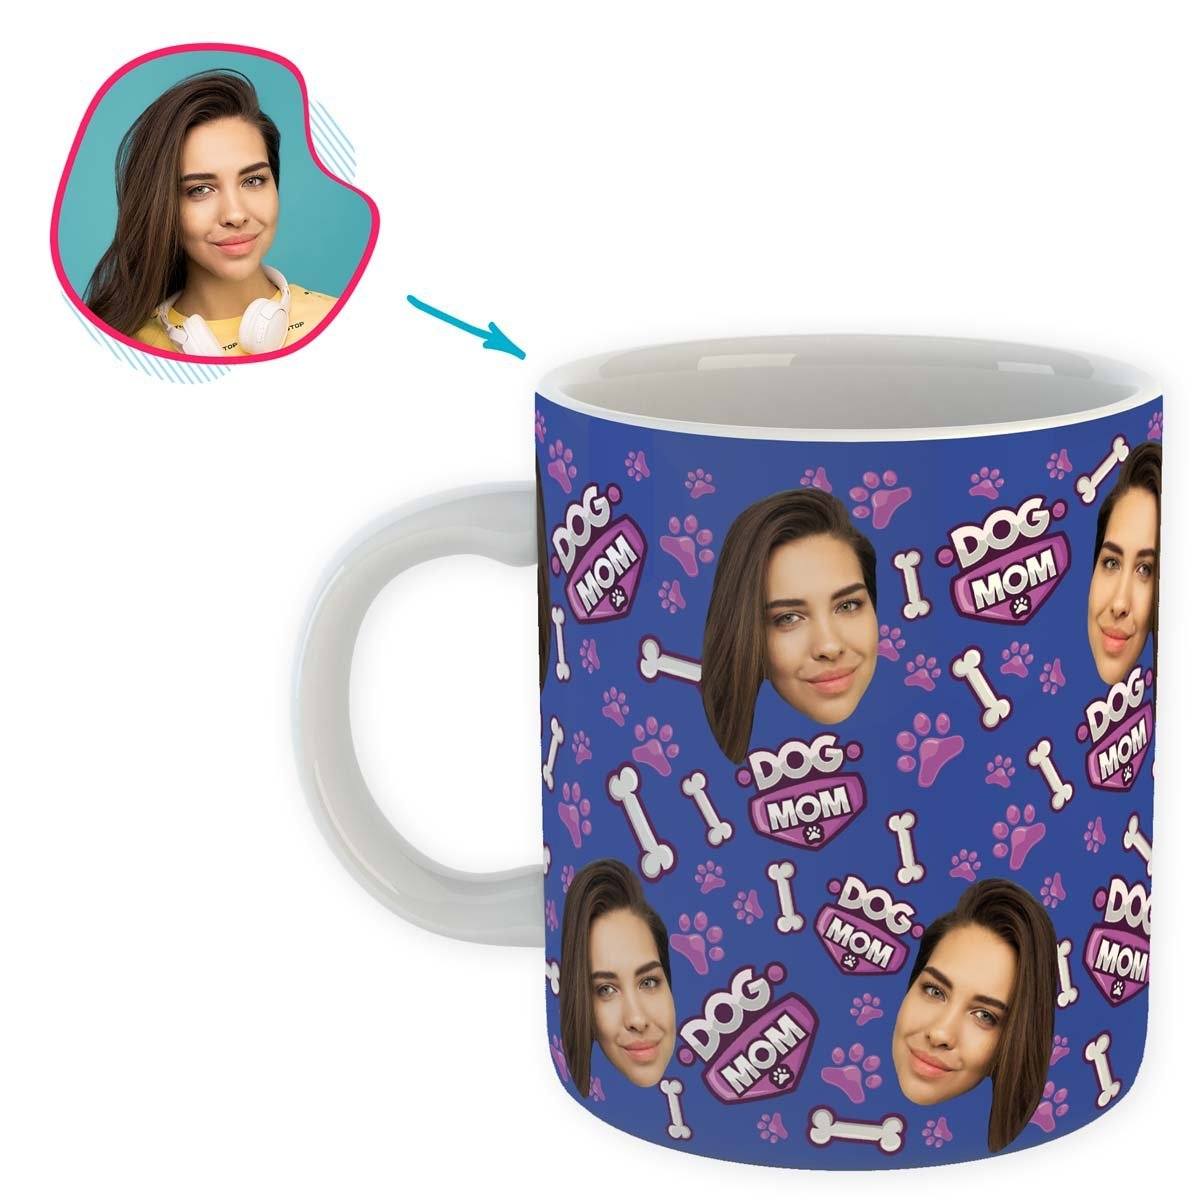 darkblue Dog Mom mug personalized with photo of face printed on it